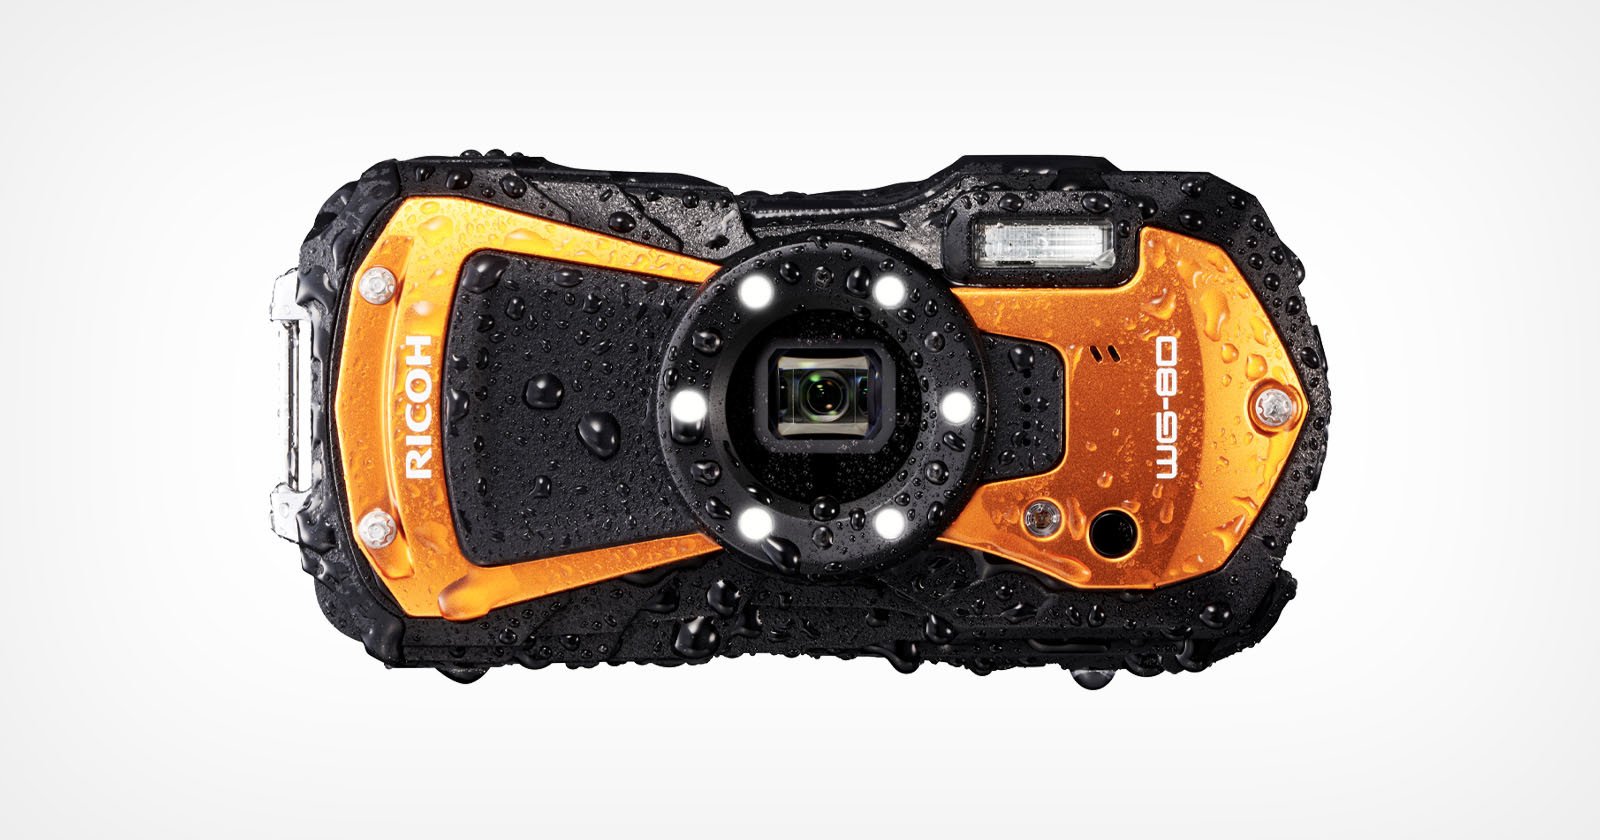 The Ricoh WG-80 is an Ultra-Rugged Point-and-Shoot with Built-in 